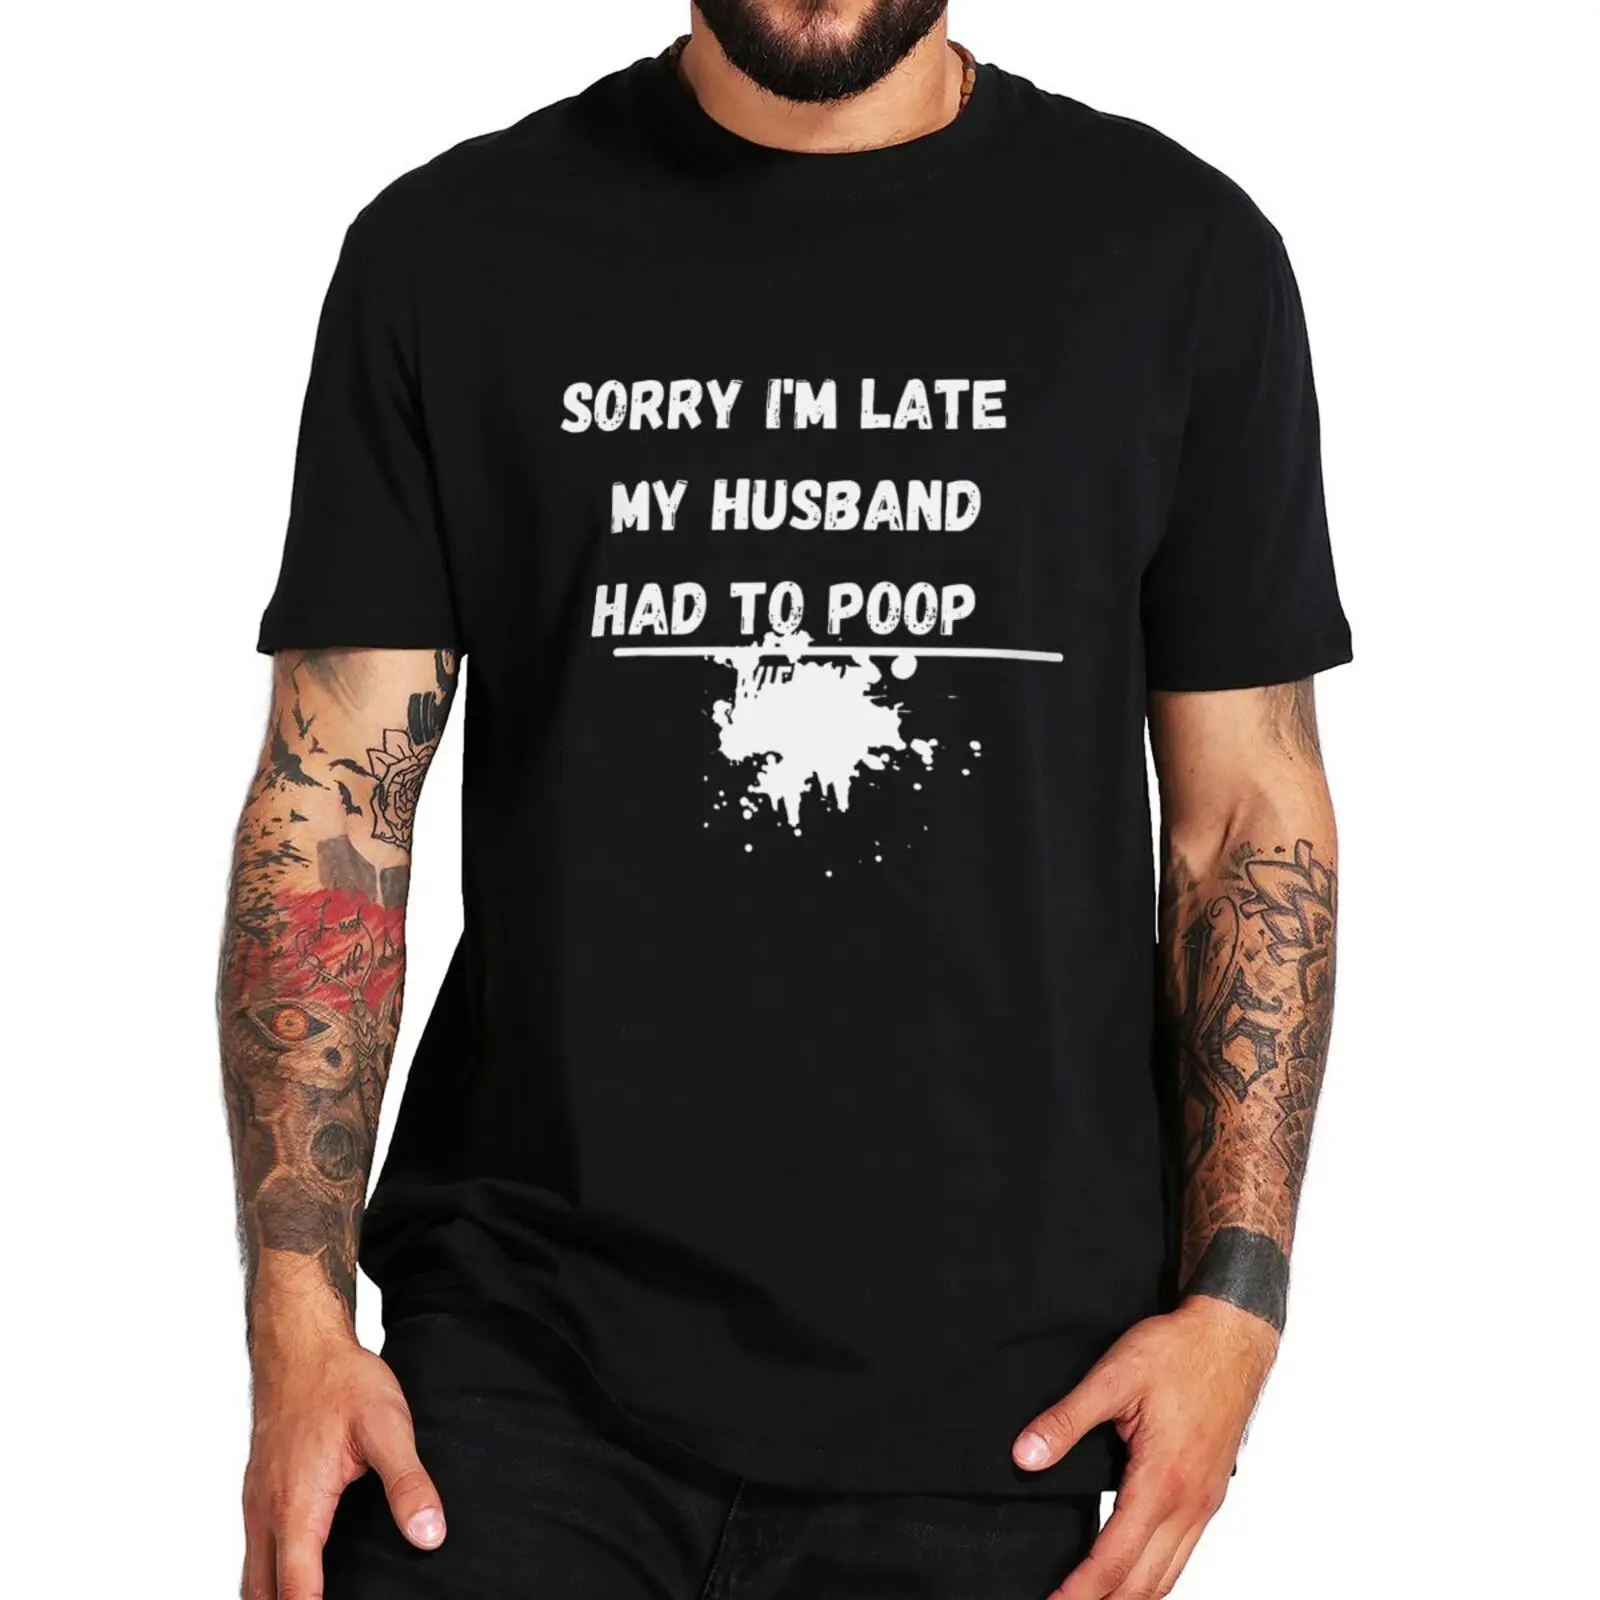 

Sorry I'm Late My Husband Had To Poop Wife Life T Shirt Funny Sarcastic Quote Tshirts Humor Design Oversize Camiseta